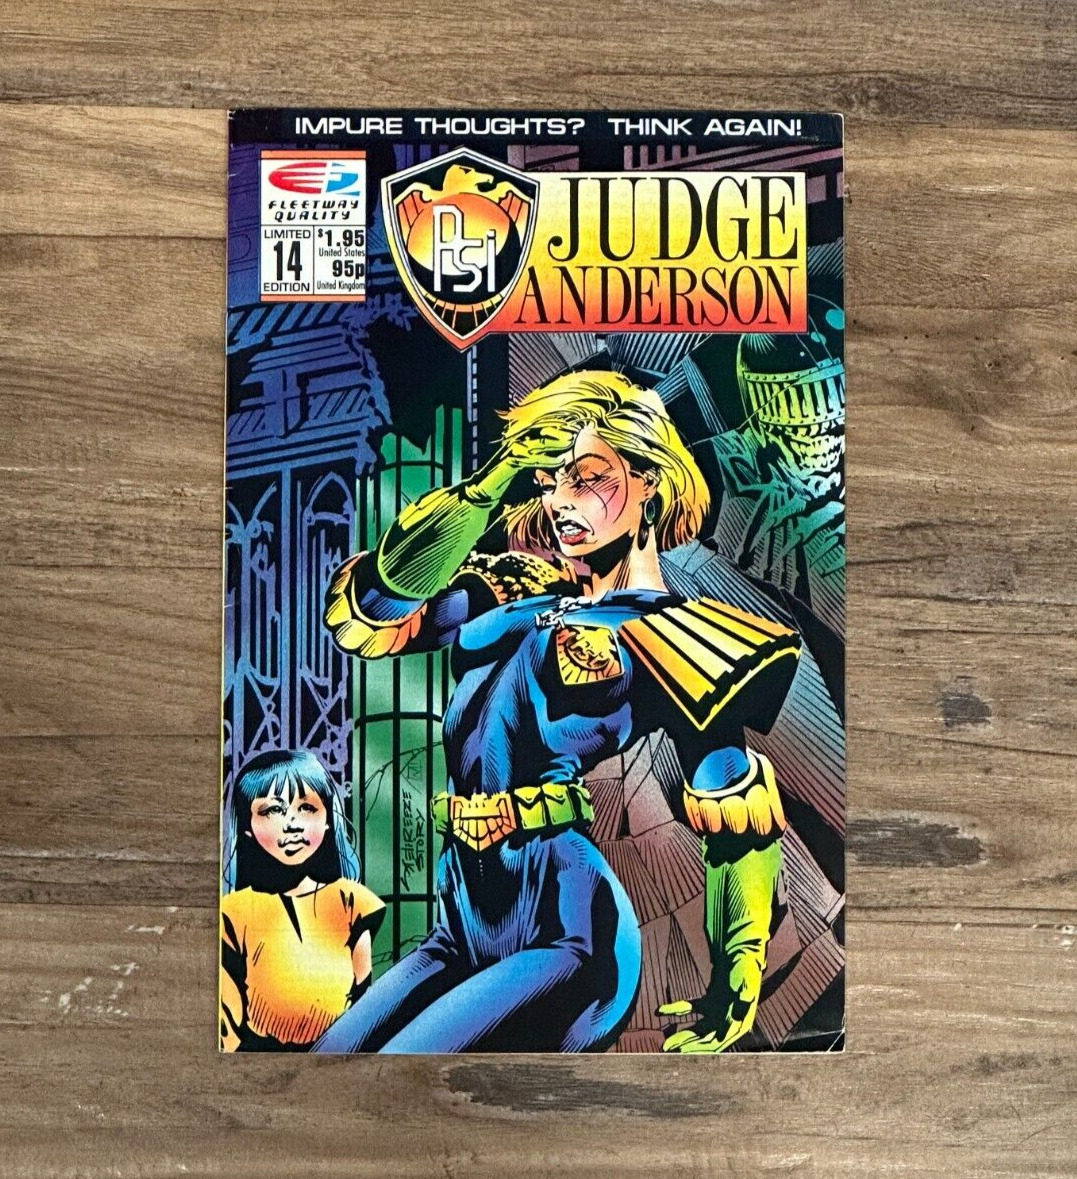 Psi-Judge Anderson #14 Fleetway Quality | Penultimate Issue